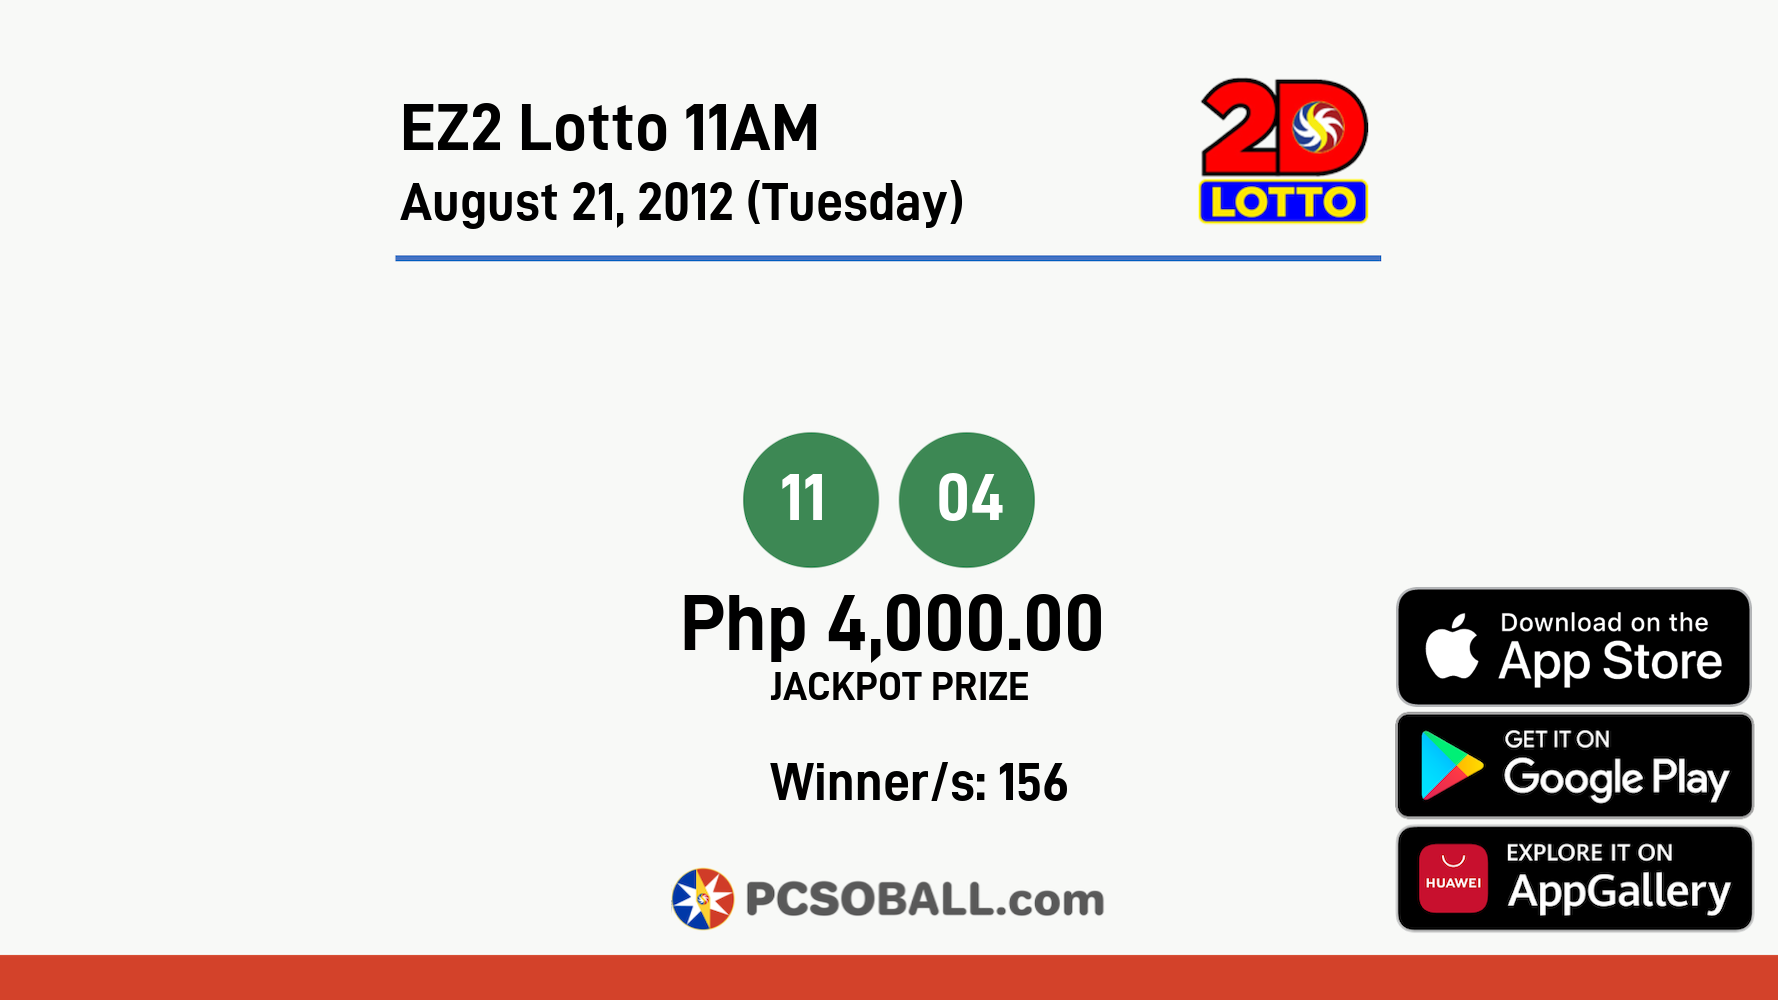 EZ2 Lotto 11AM August 21, 2012 (Tuesday) Result